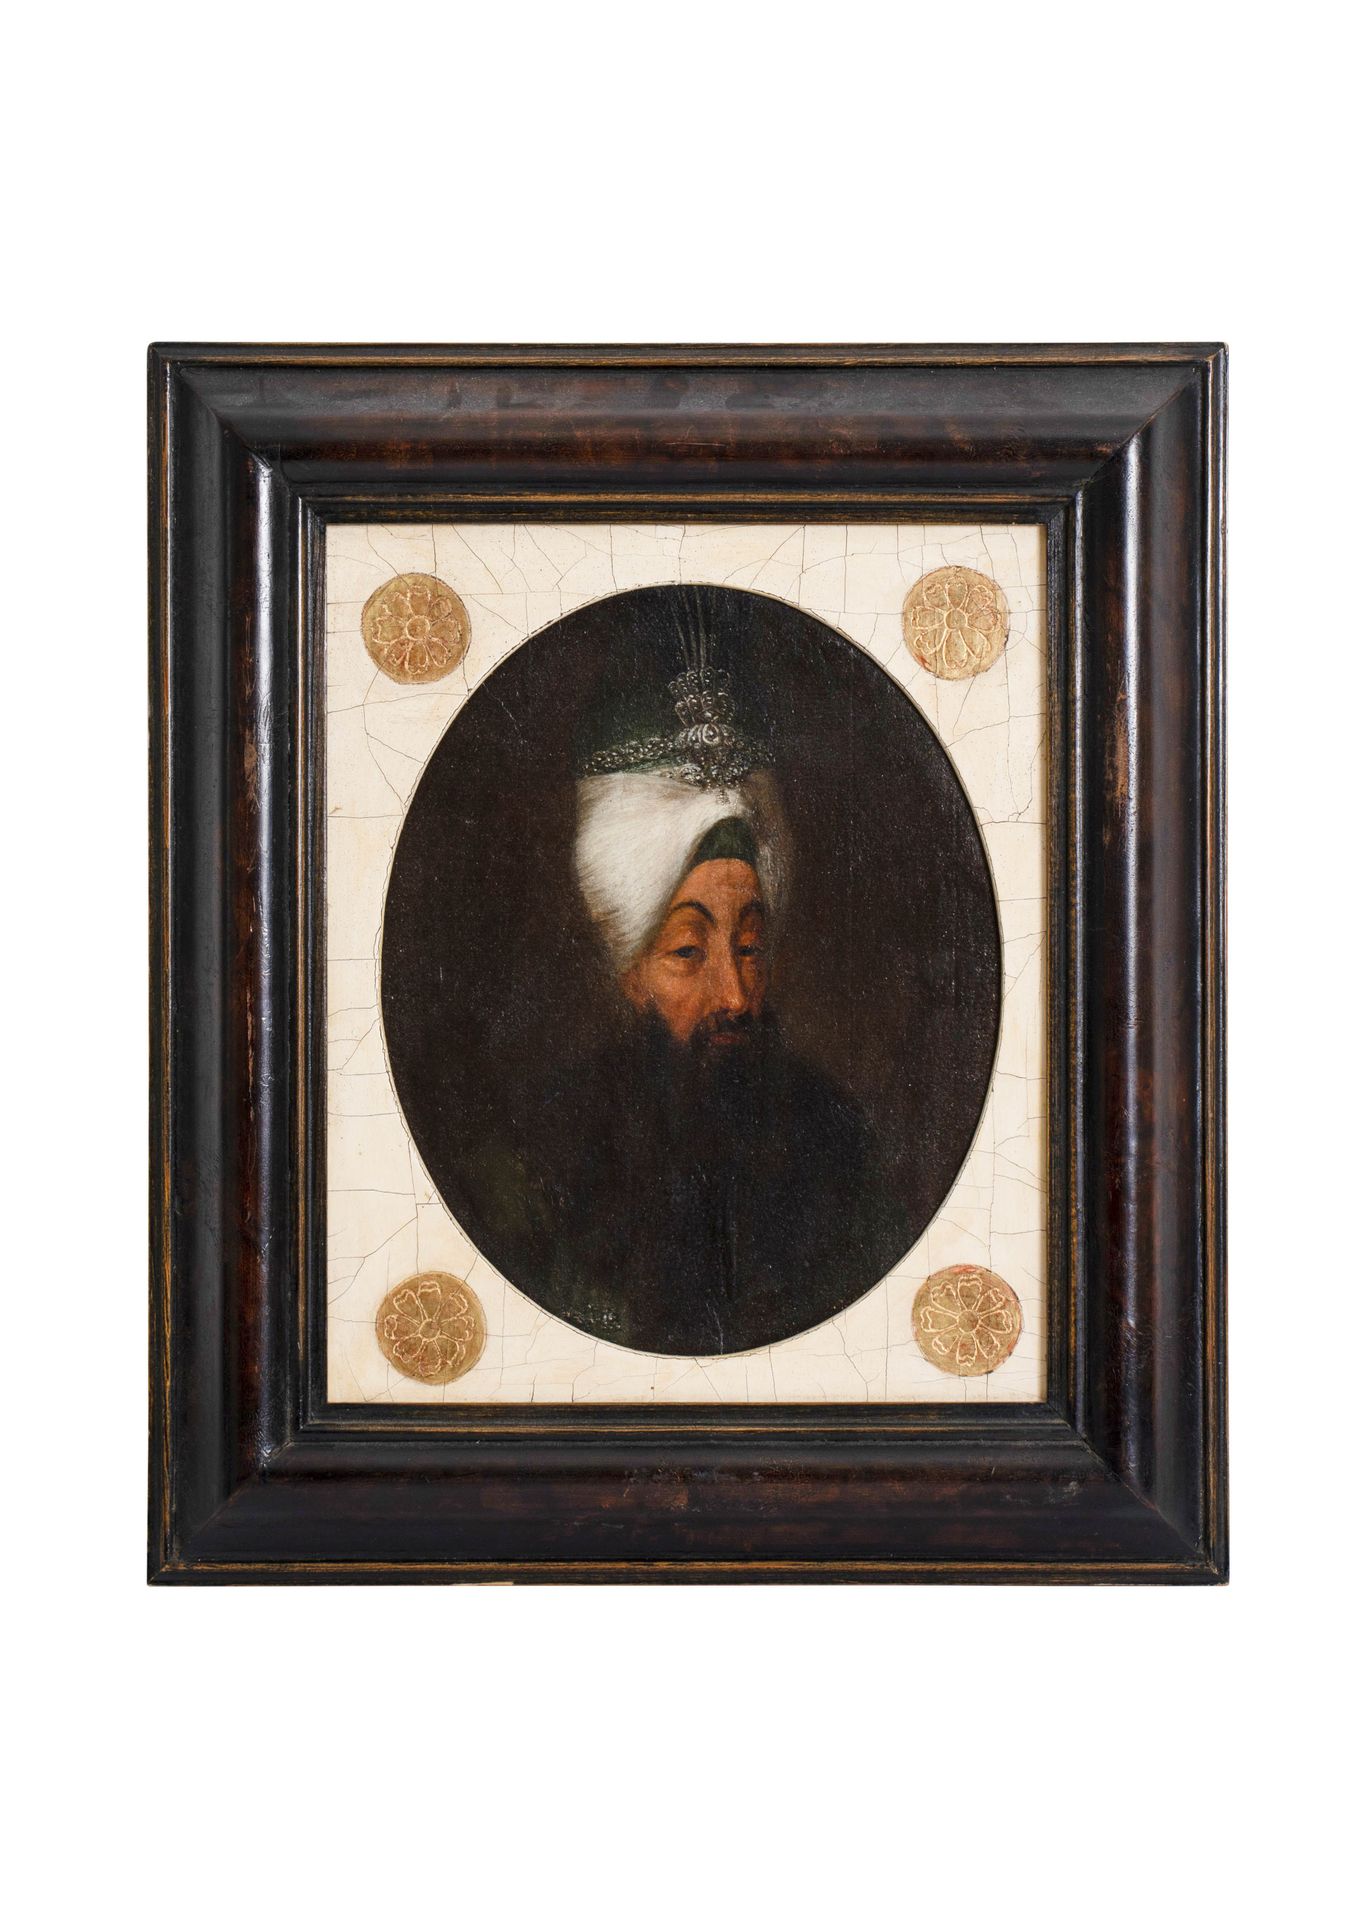 AN IMPORTANT OTTOMAN OIL PAINTING OF SULTAN ABDULHAMID I, 18TH CENTURY 一幅重要的苏丹阿布&hellip;